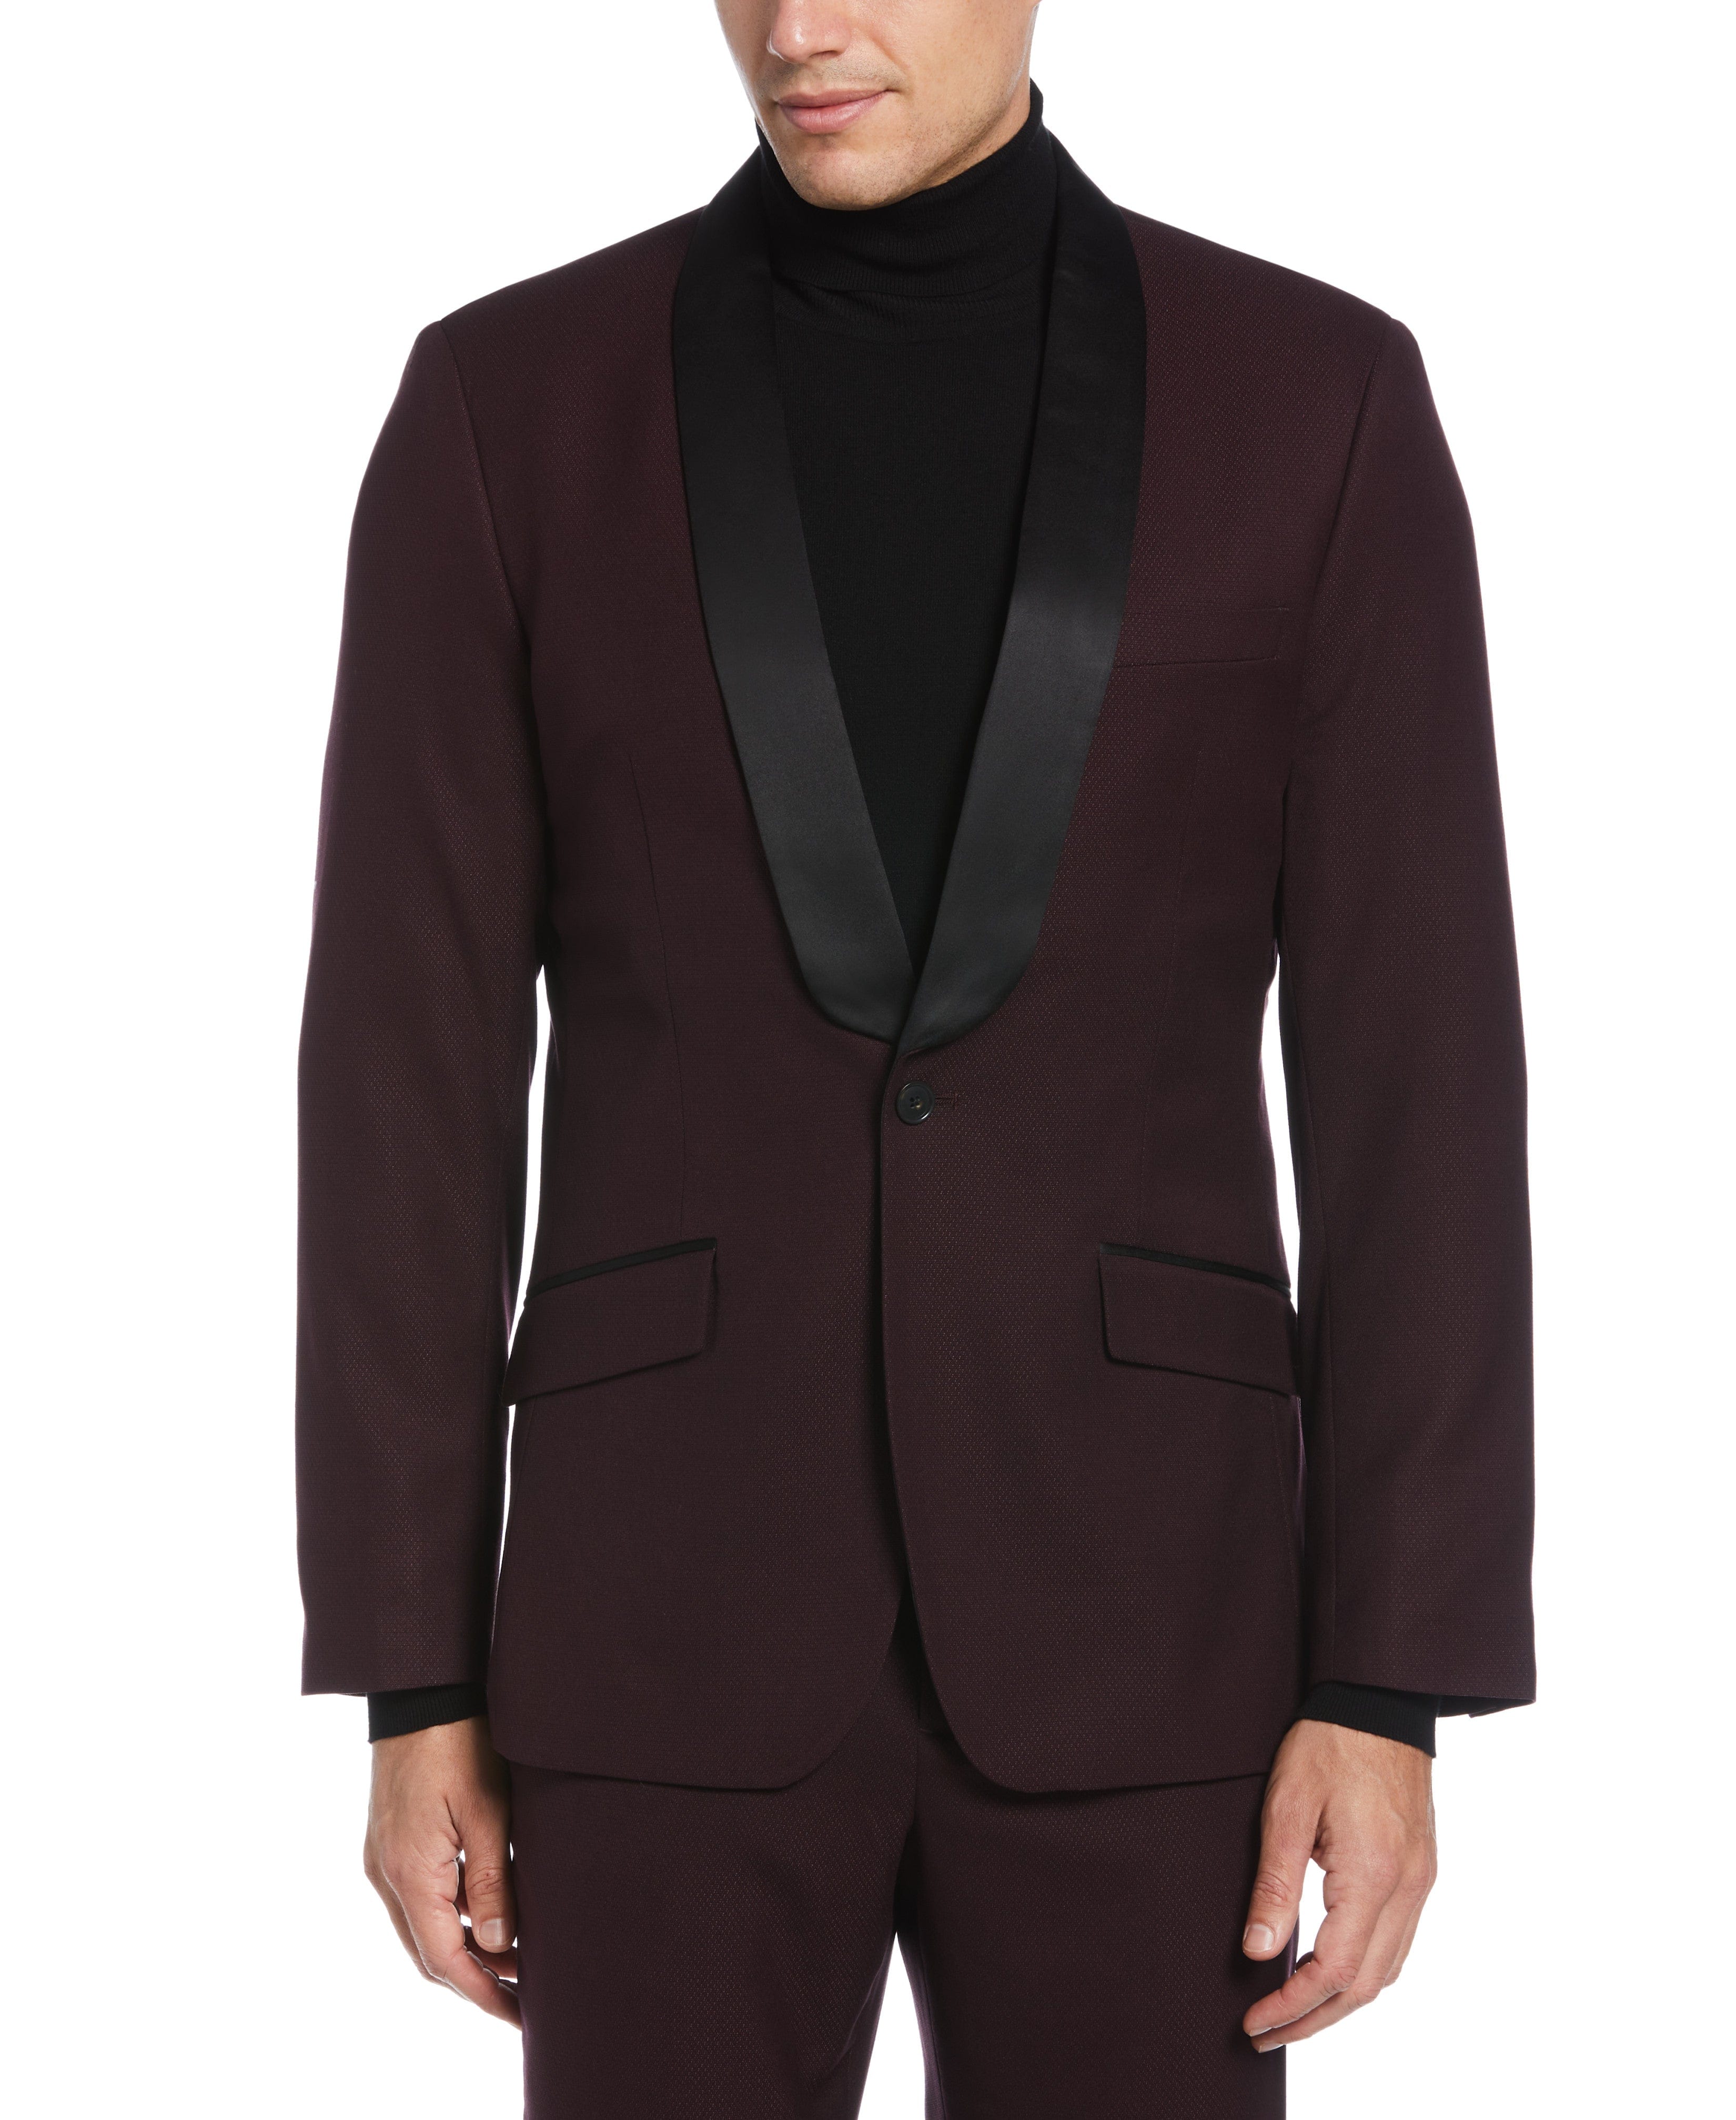 New Vintage Tuxedos, Tailcoats, Morning Suits, Dinner Jackets Perry Ellis Mens Slim Fit Textured Tuxedo Jacket in PortRed Size 40  Regular PolyesterElastaneViscose $250.00 AT vintagedancer.com